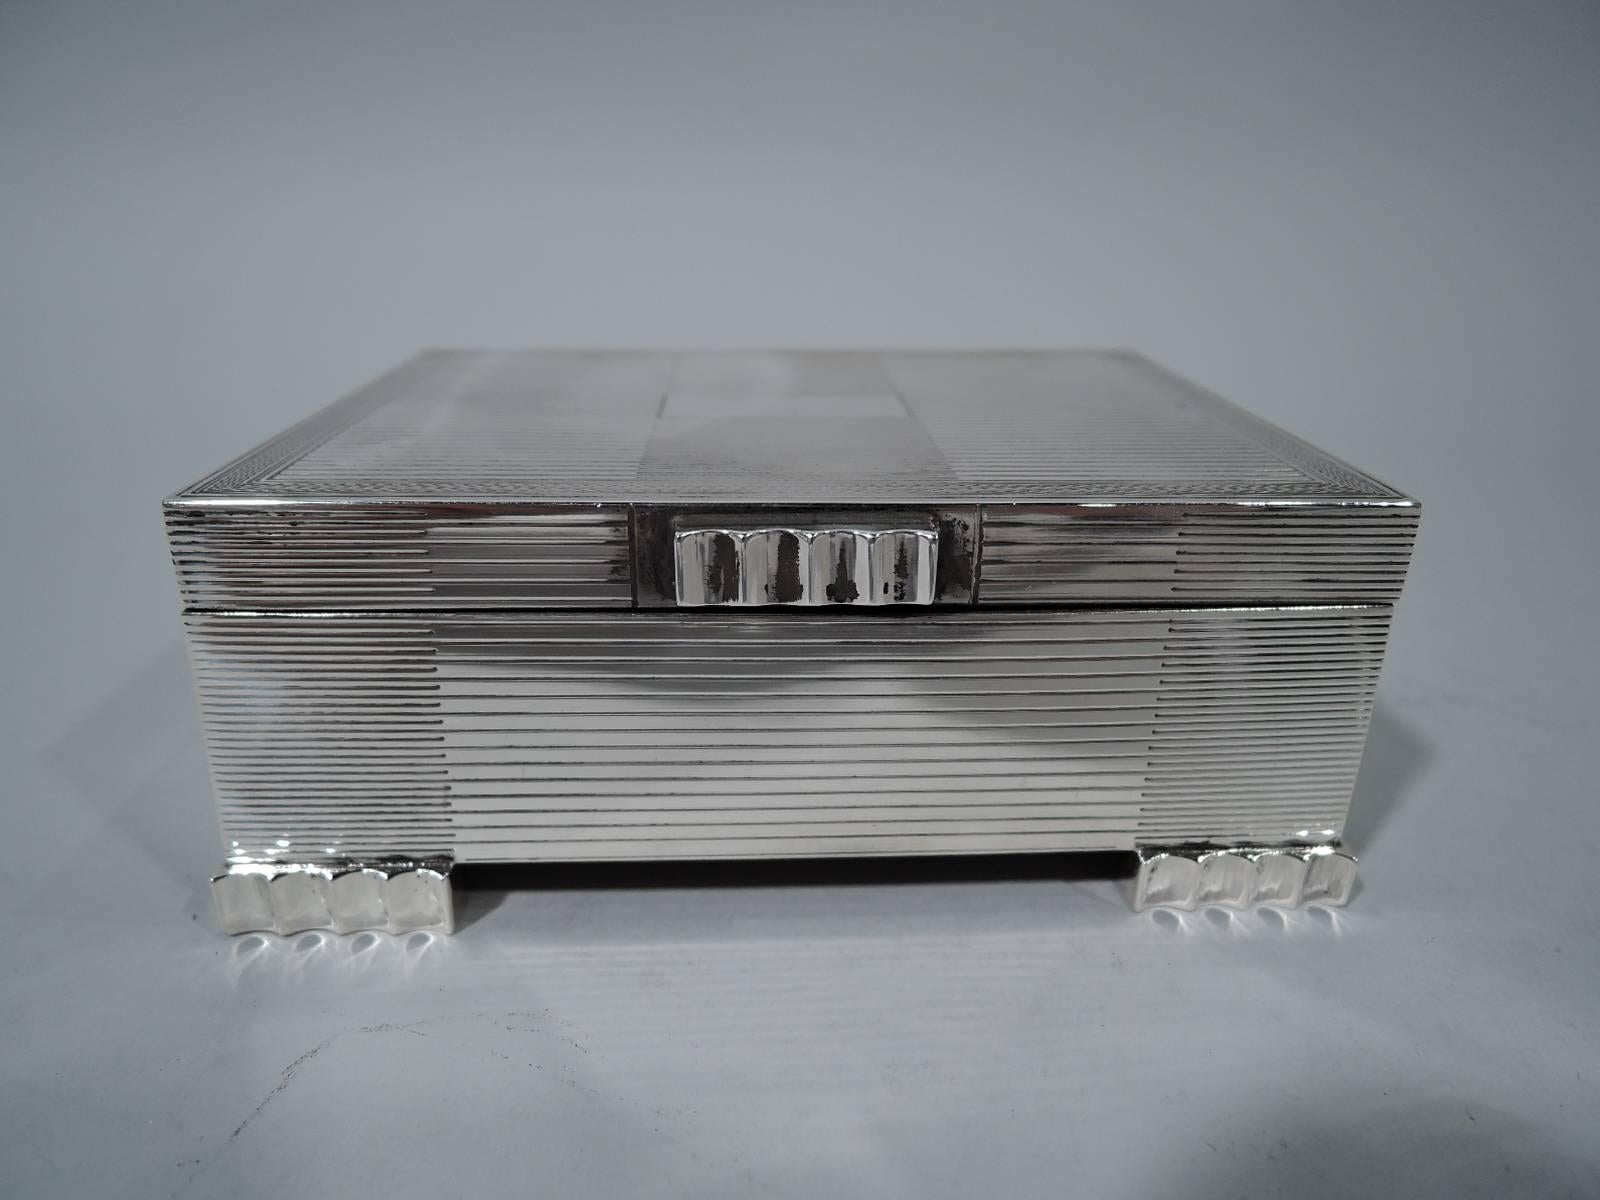 Snazzy sterling silver box. Made by John B. Chatterley & Sons in Birmingham in 1953. Rectangular with straight sides and flat hinged cover. Fluted corner bracket supports and tab. Engraved linear ornament. Cover has wavy border and central